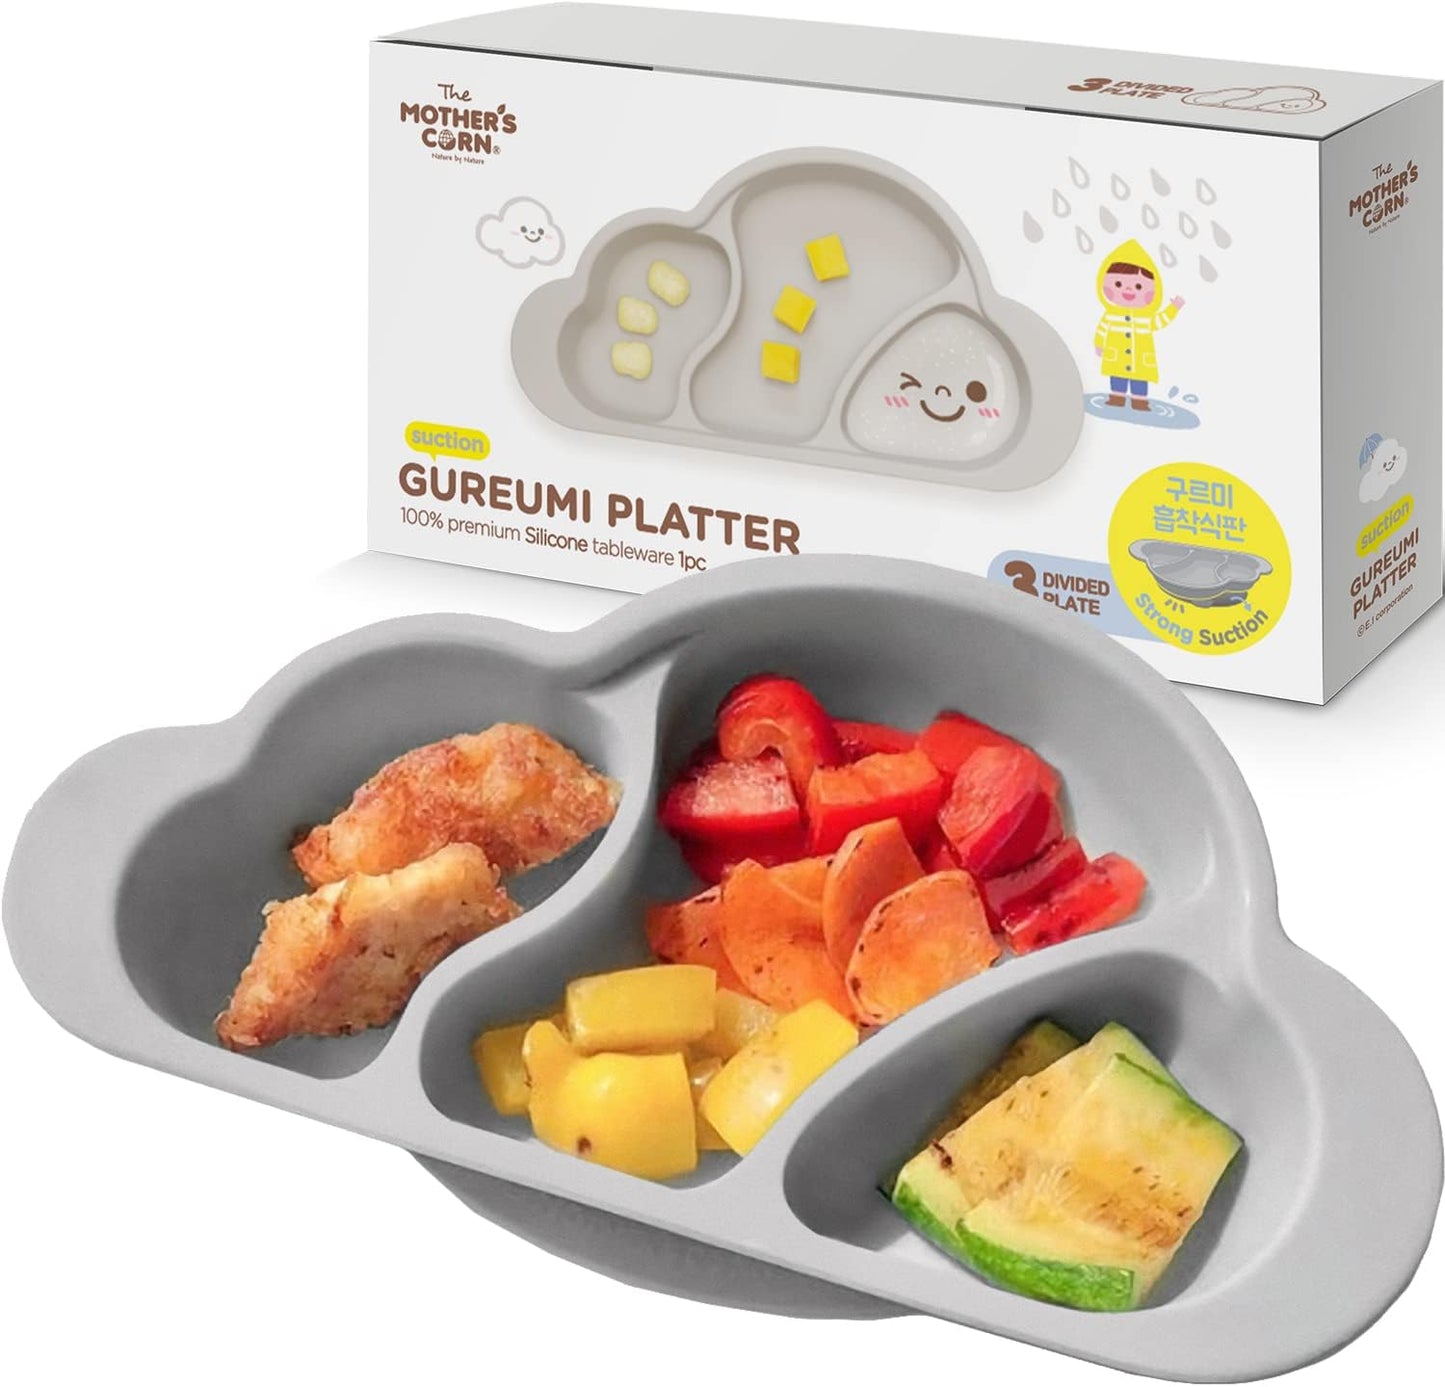 Mother's Corn Gureumi Three Division Suction Platter - Gray Color